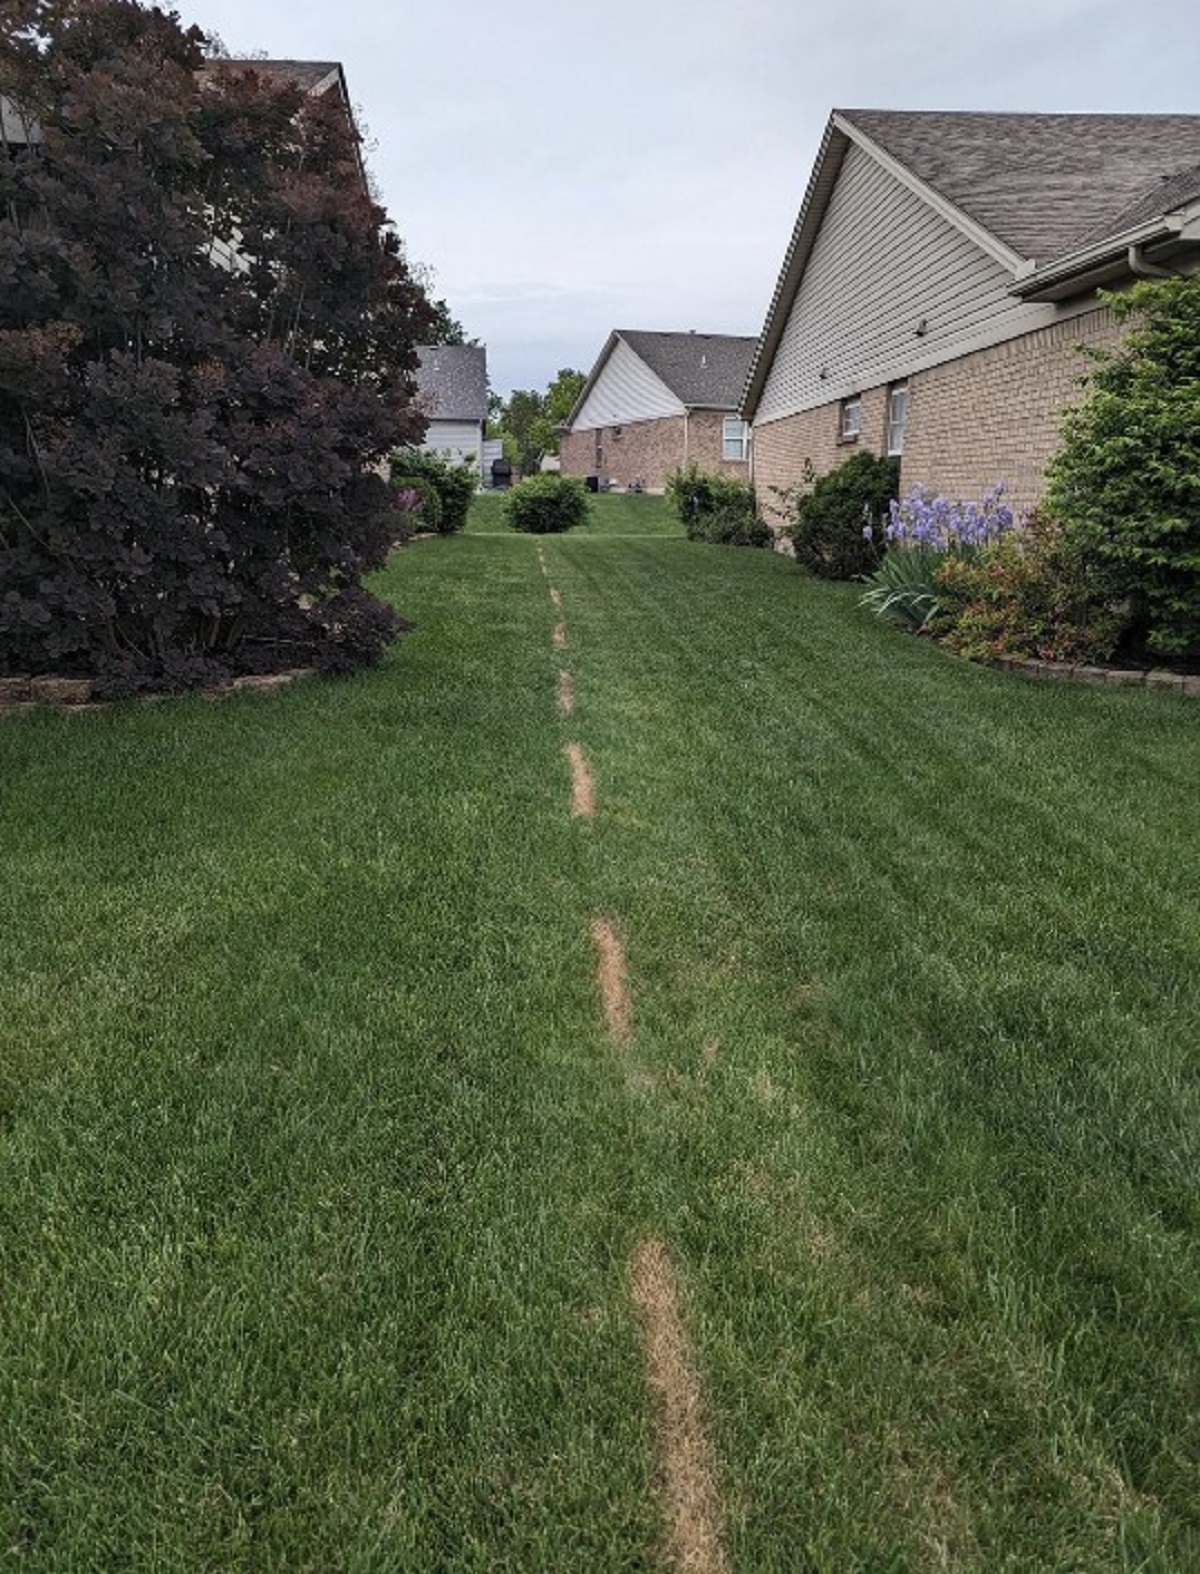 Neighbor not happy that we mowed one row into his lawn, so he decided to spray grass killer to make a point.